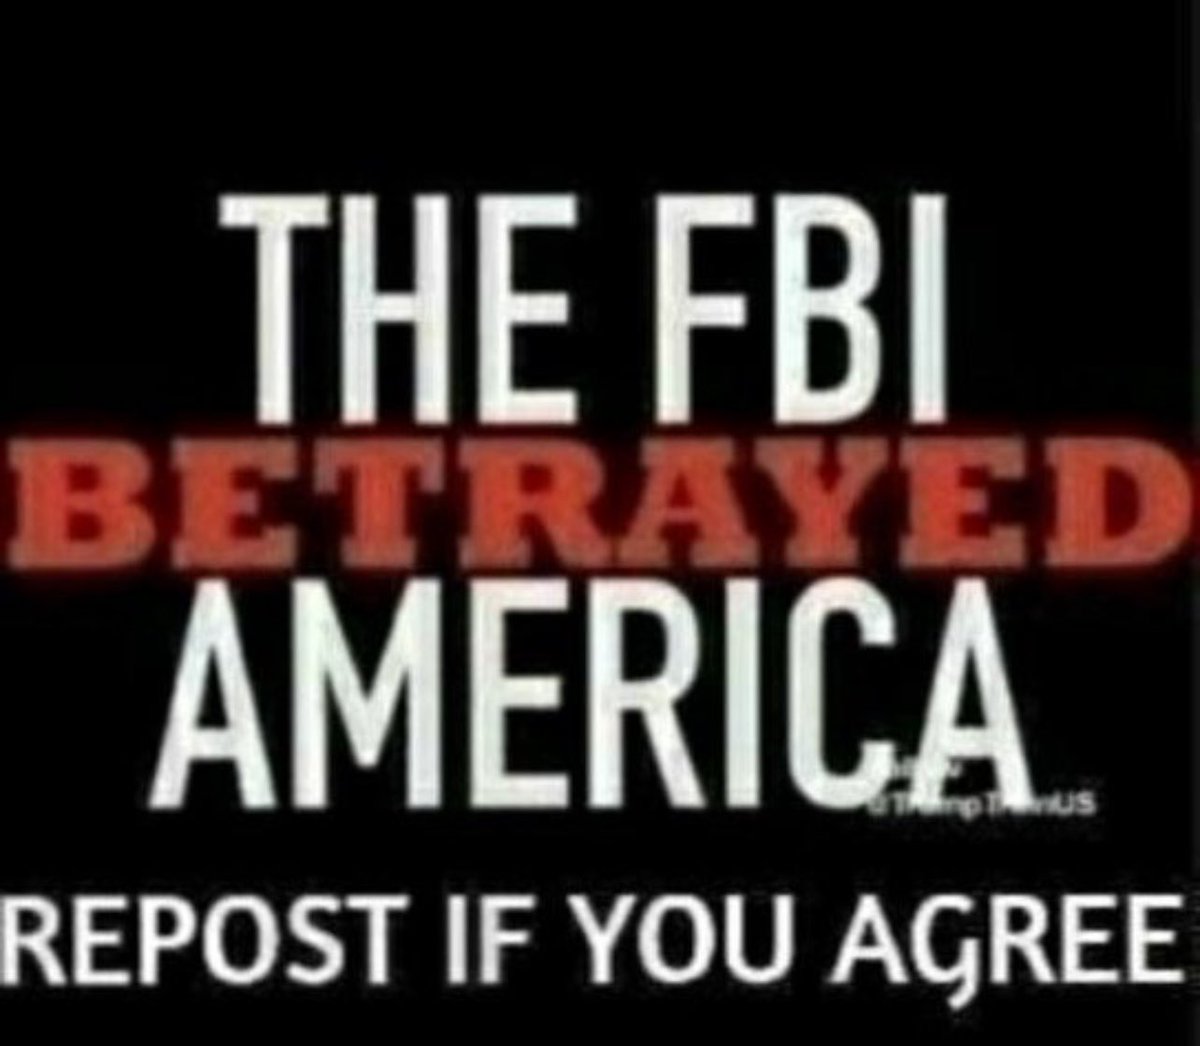 We have a two-tier justice system in America. It’s time to cleanse the FBI/DOJ. Say 'Yes if you agree!